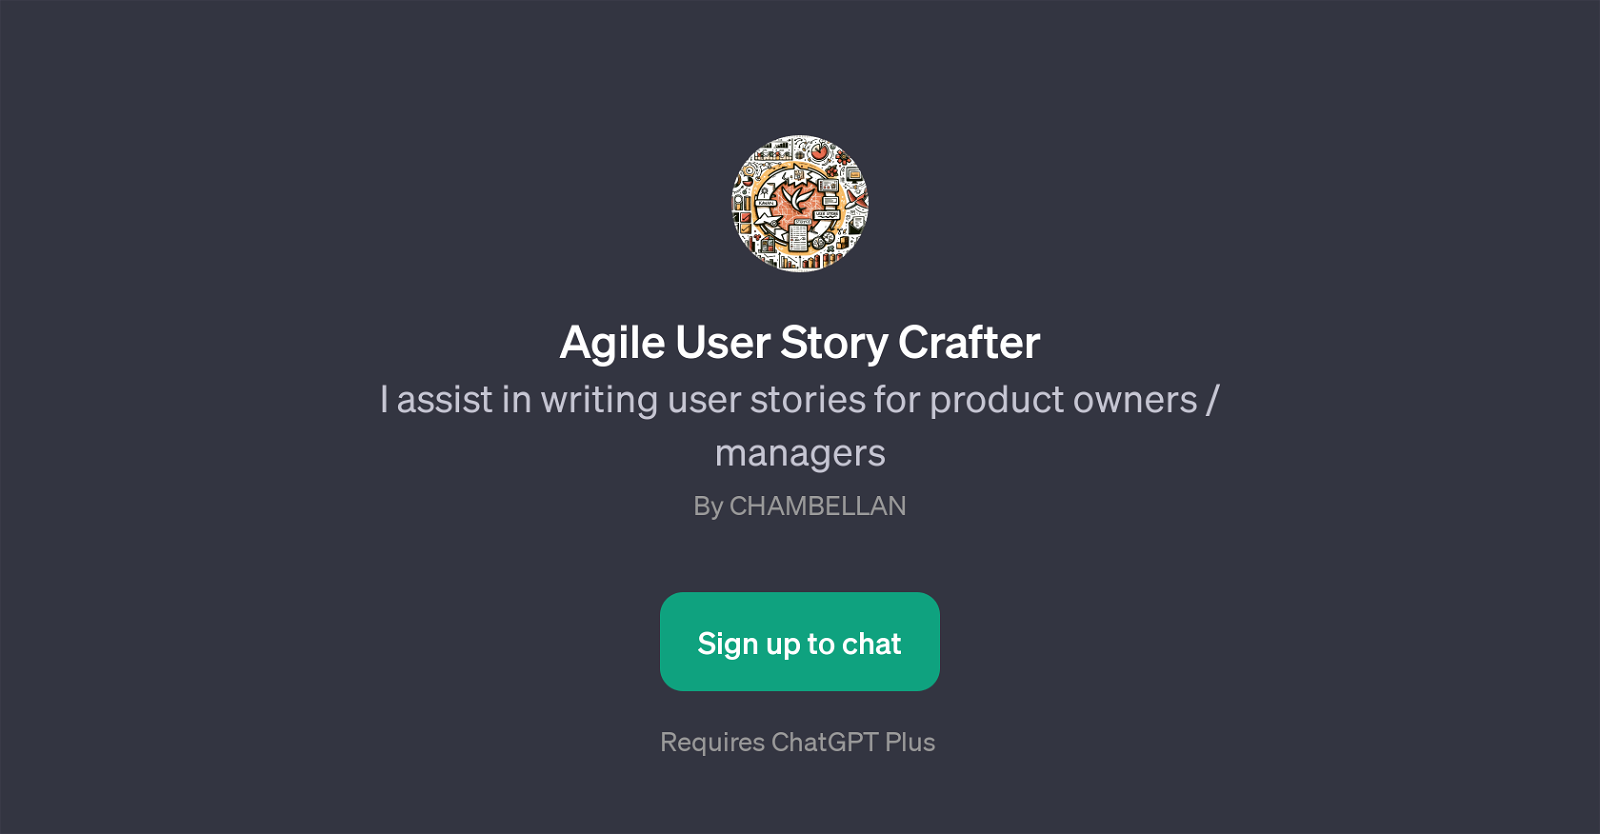 Agile User Story Crafter website